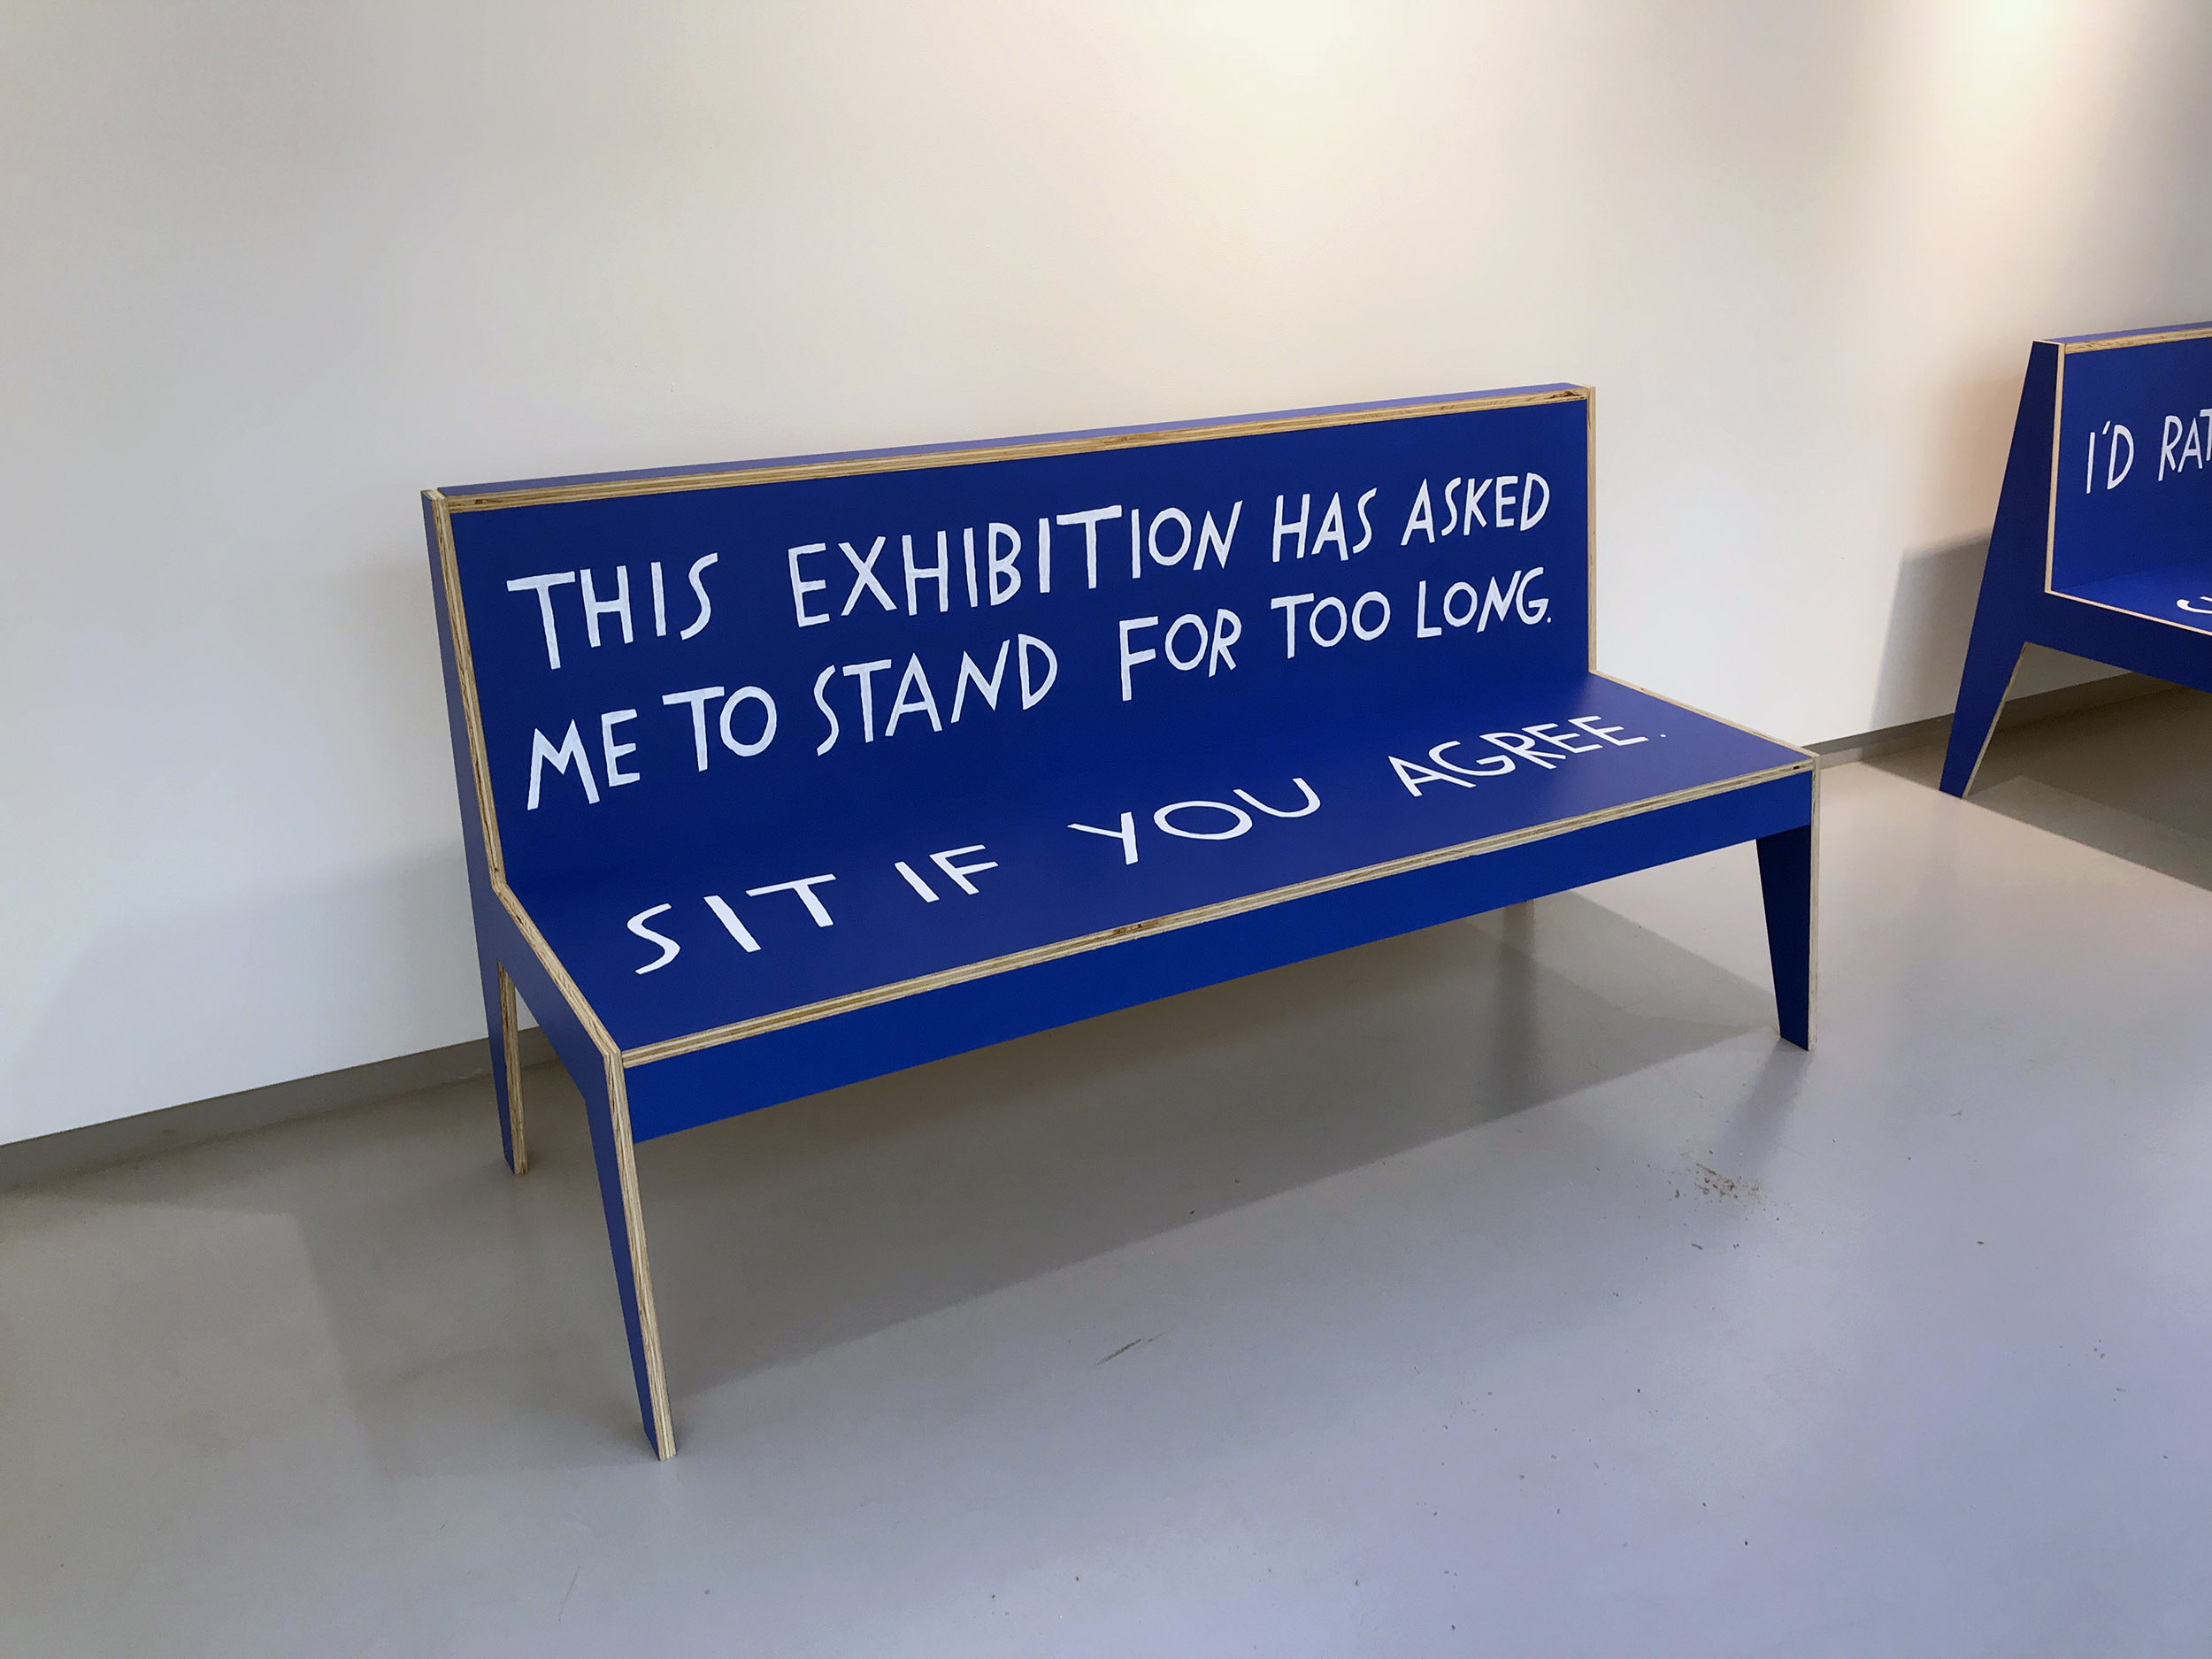 Featured image: Shannon Finnegan, Do you want us here or not?, 2018, MDO, paint. Blue wooden bench in a gallery with text painted on it. The back of the bench reads, "This exhibition has asked me to stand for too long." The seat reads, "Sit if you agree." Image courtesy the artist.